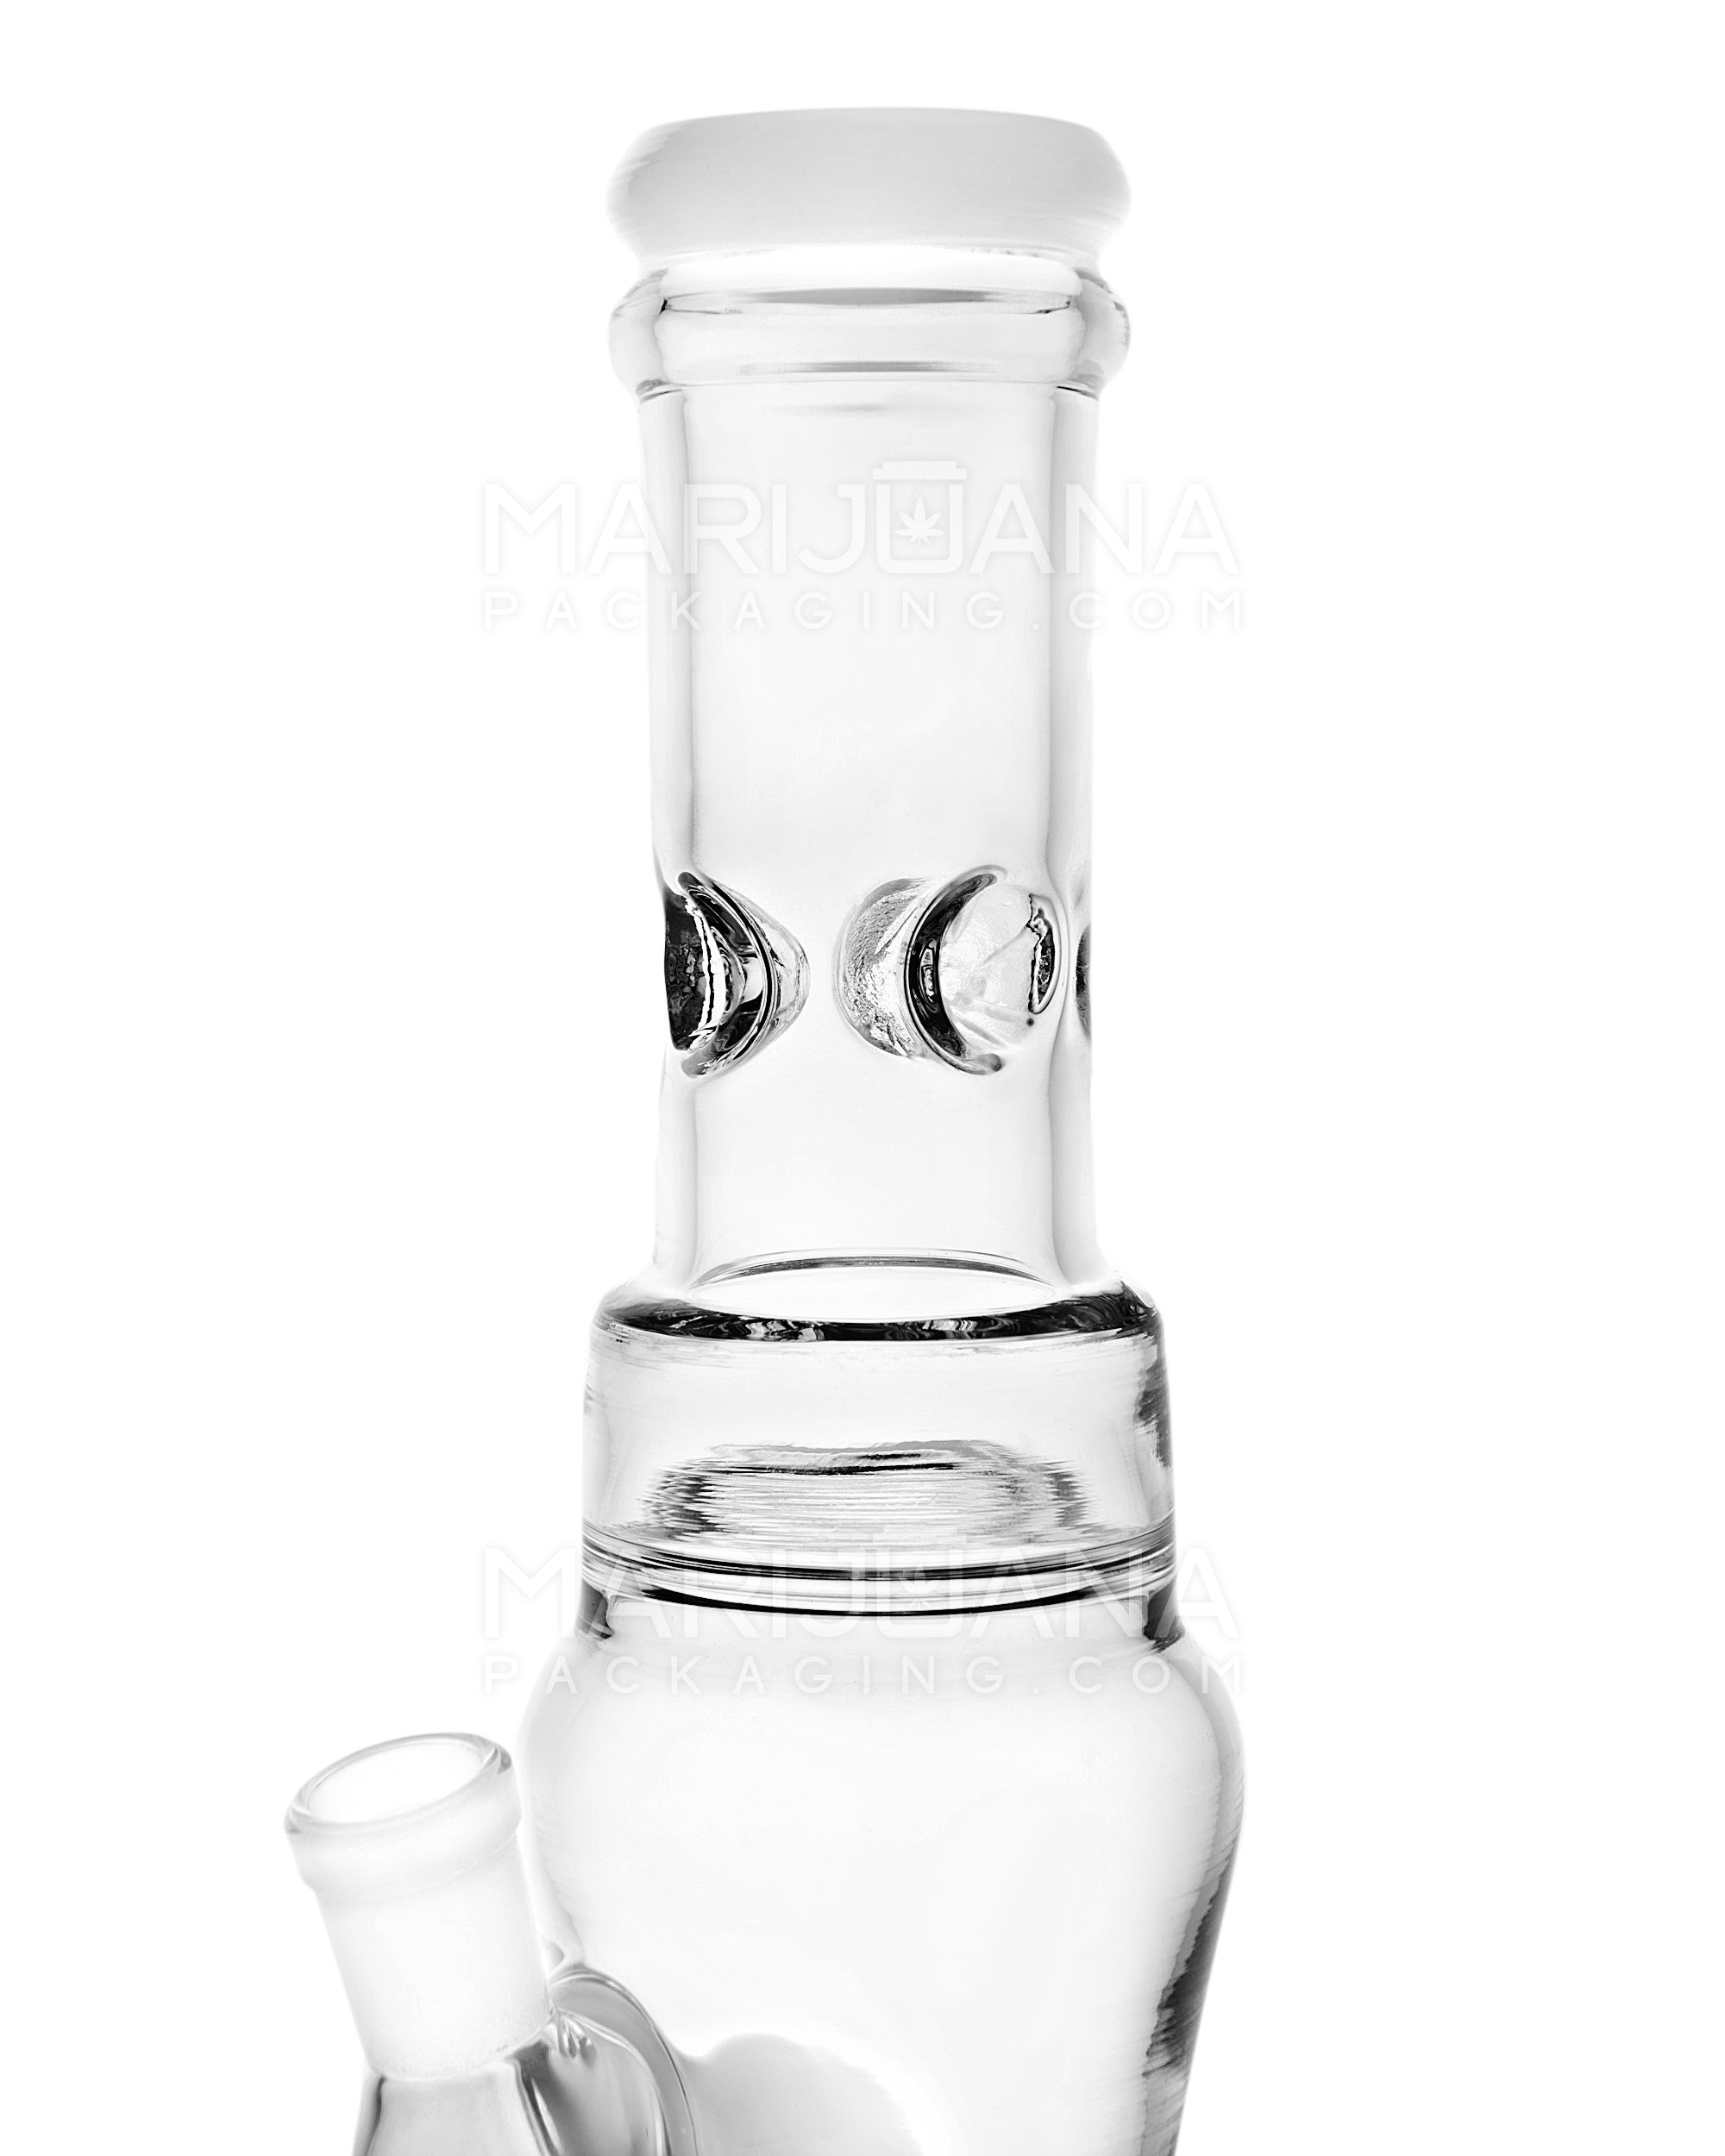 Straight Neck Atomic Perc Dab Rig w/ Ice Catcher & Thick Base | 10in Tall - 14mm Banger - White - 4